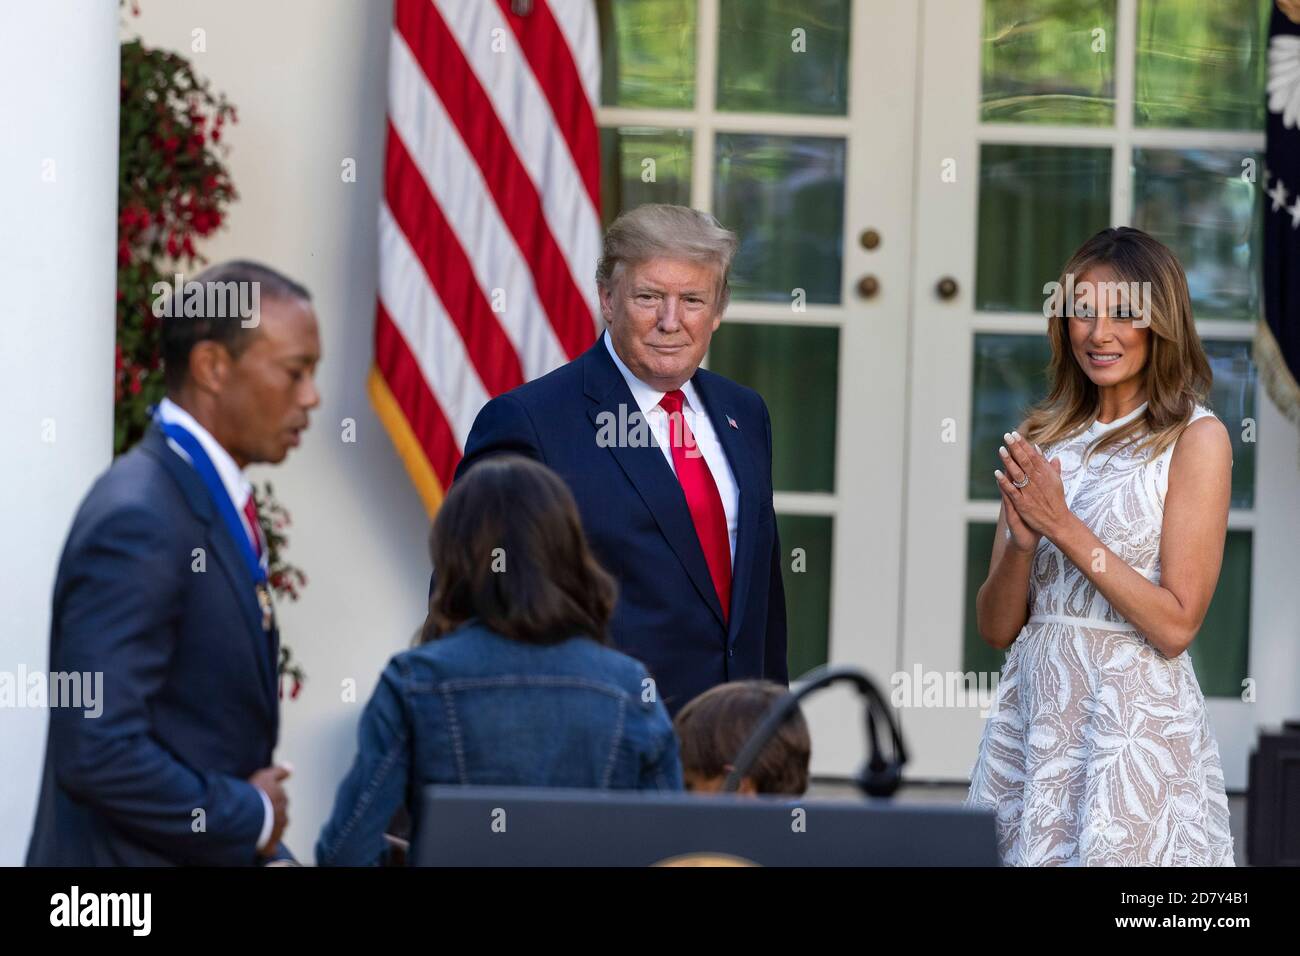 U.S. President Donald Trump and First Lady Melania Trump invite golfer Tiger Woods and his family into the Oval Office after Trump awarded the Presidential Medal of Freedom to Woods in the Rose Garden of the White House in Washington, D.C. on Monday, May 6, 2019. The Presidential Medal of Freedom is the highest honor a U.S. President can bestow on a civilian. Woods is the fourth golfer to receive the award. Credit: Alex Edelman/The Photo Access Stock Photo